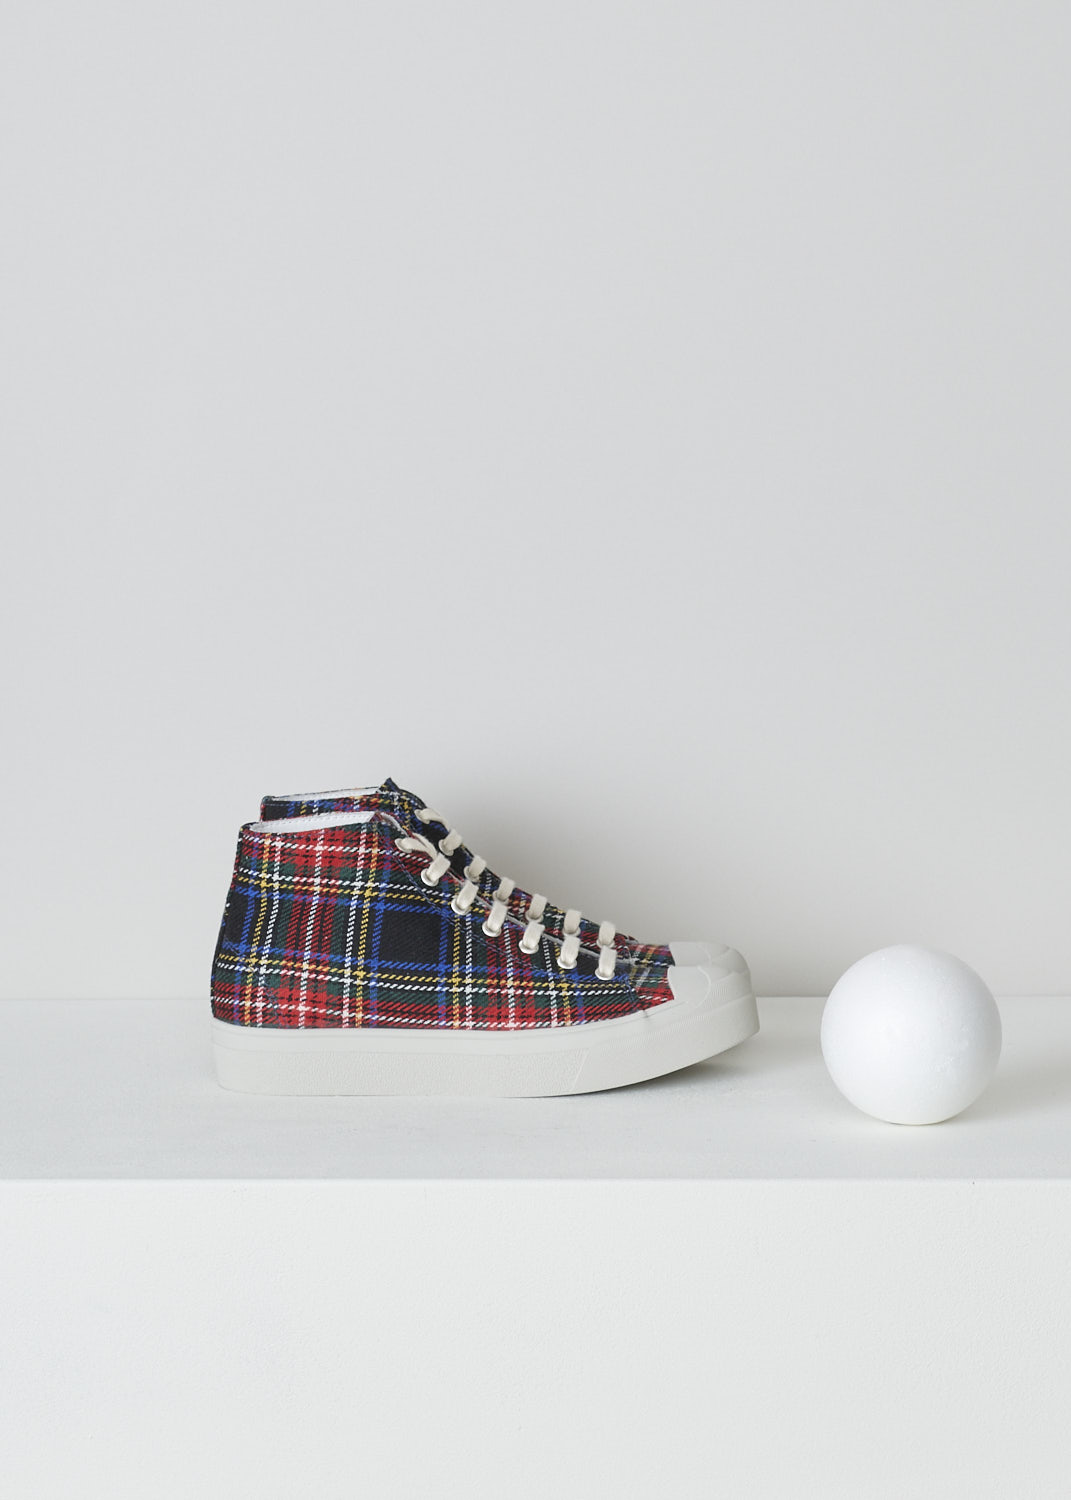 SOFIE Dâ€™HOORE, RED AND BLUE TARTAN SNEAKERS, FOSTER_WSCOT_TARTAN_4, Red, Blue, Print, Side, These high top sneakers with red and blue tartan print feature front lace-up fastening with white laces. These sneakers have a round toe with a white rubber toe cap. These shoes have white rubber soles.

